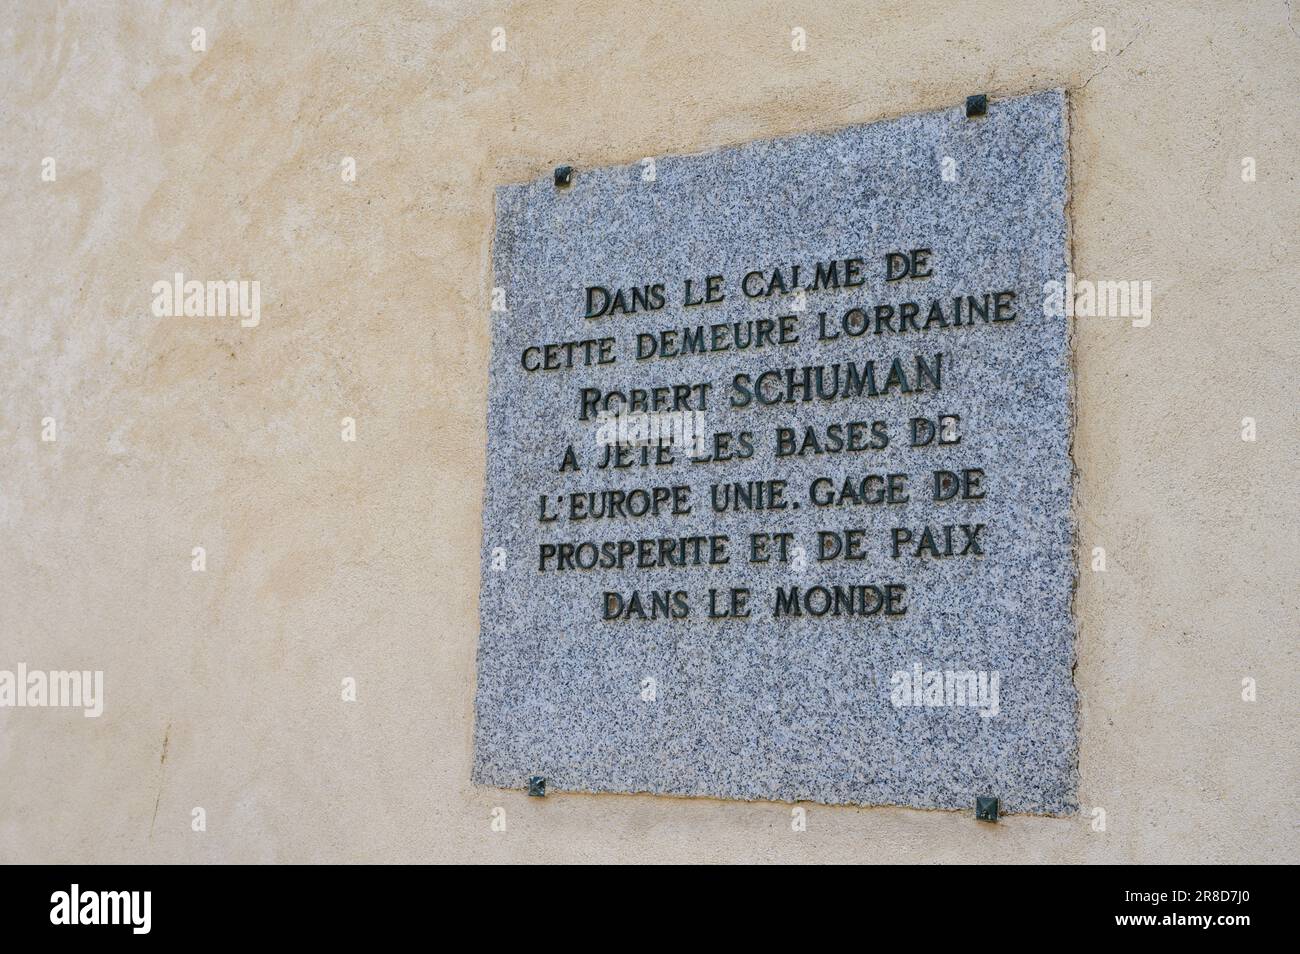 A commemorative tablet on the house where Robert Schuman, the Father of Europe, lived. Stock Photo